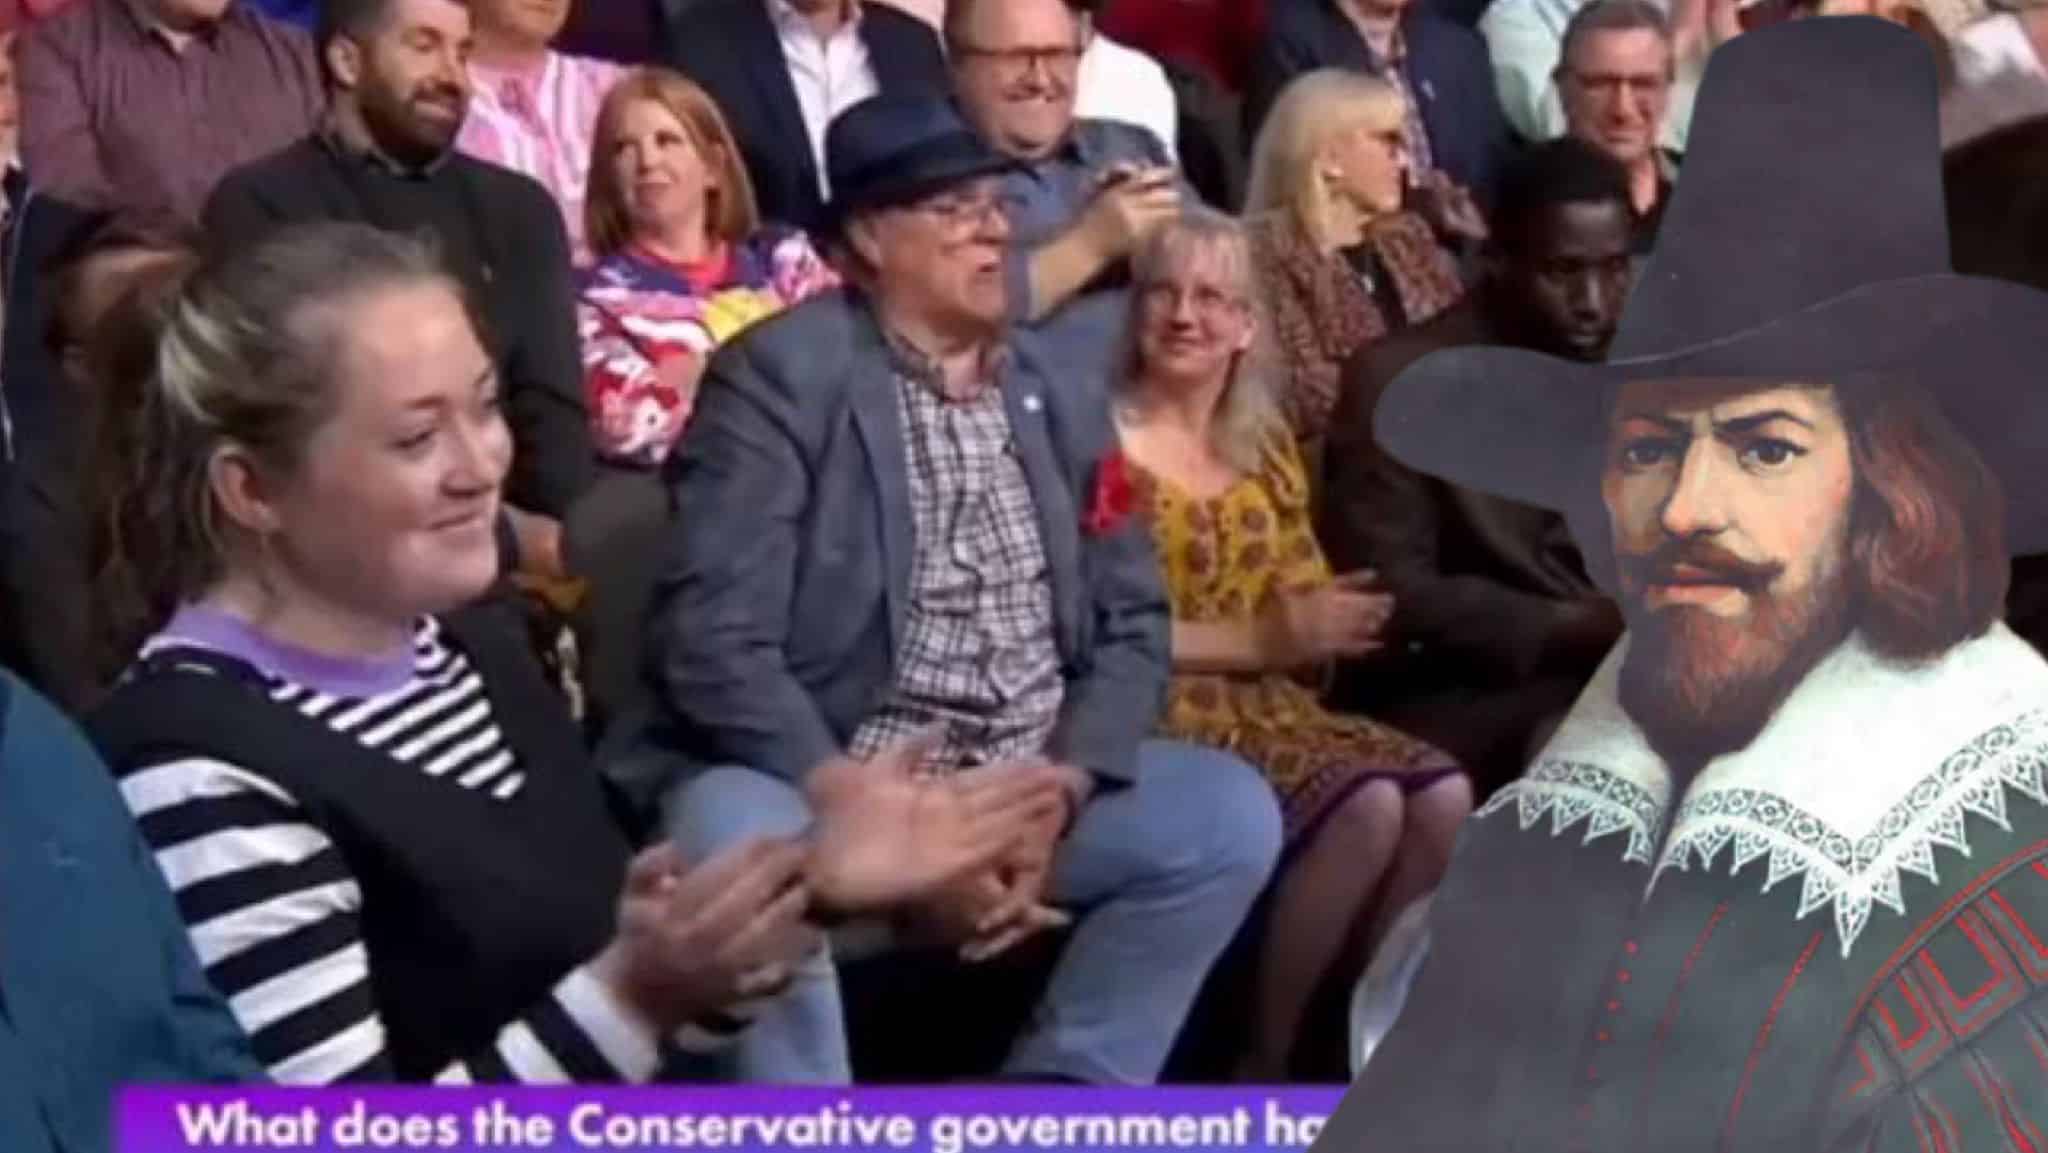 ‘Only Guy Fawkes had good intentions!’ BBC Question Time audience member blasts politicians